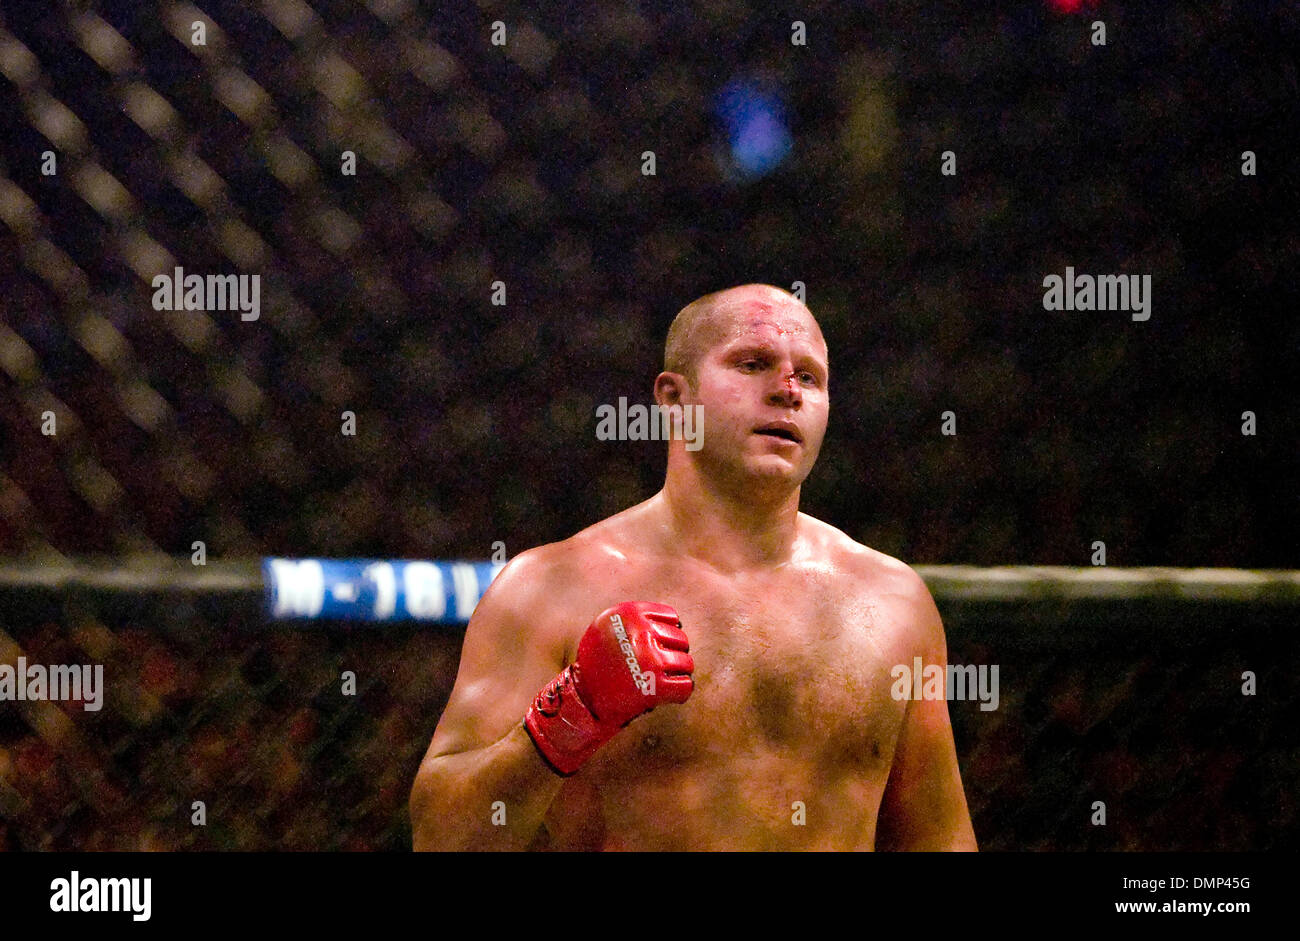 Nov. 07, 2009 - Hoffman Estates, Illinois, U.S - 07 November 2009:  Fedor Emelianenko raises his hand after knocking out Brett Rogers during their Heavyweight fight at the Sears Centre in Hoffman Estates, IL  (Credit Image: © Louis Brems/Southcreek Global/ZUMApress.com) Stock Photo